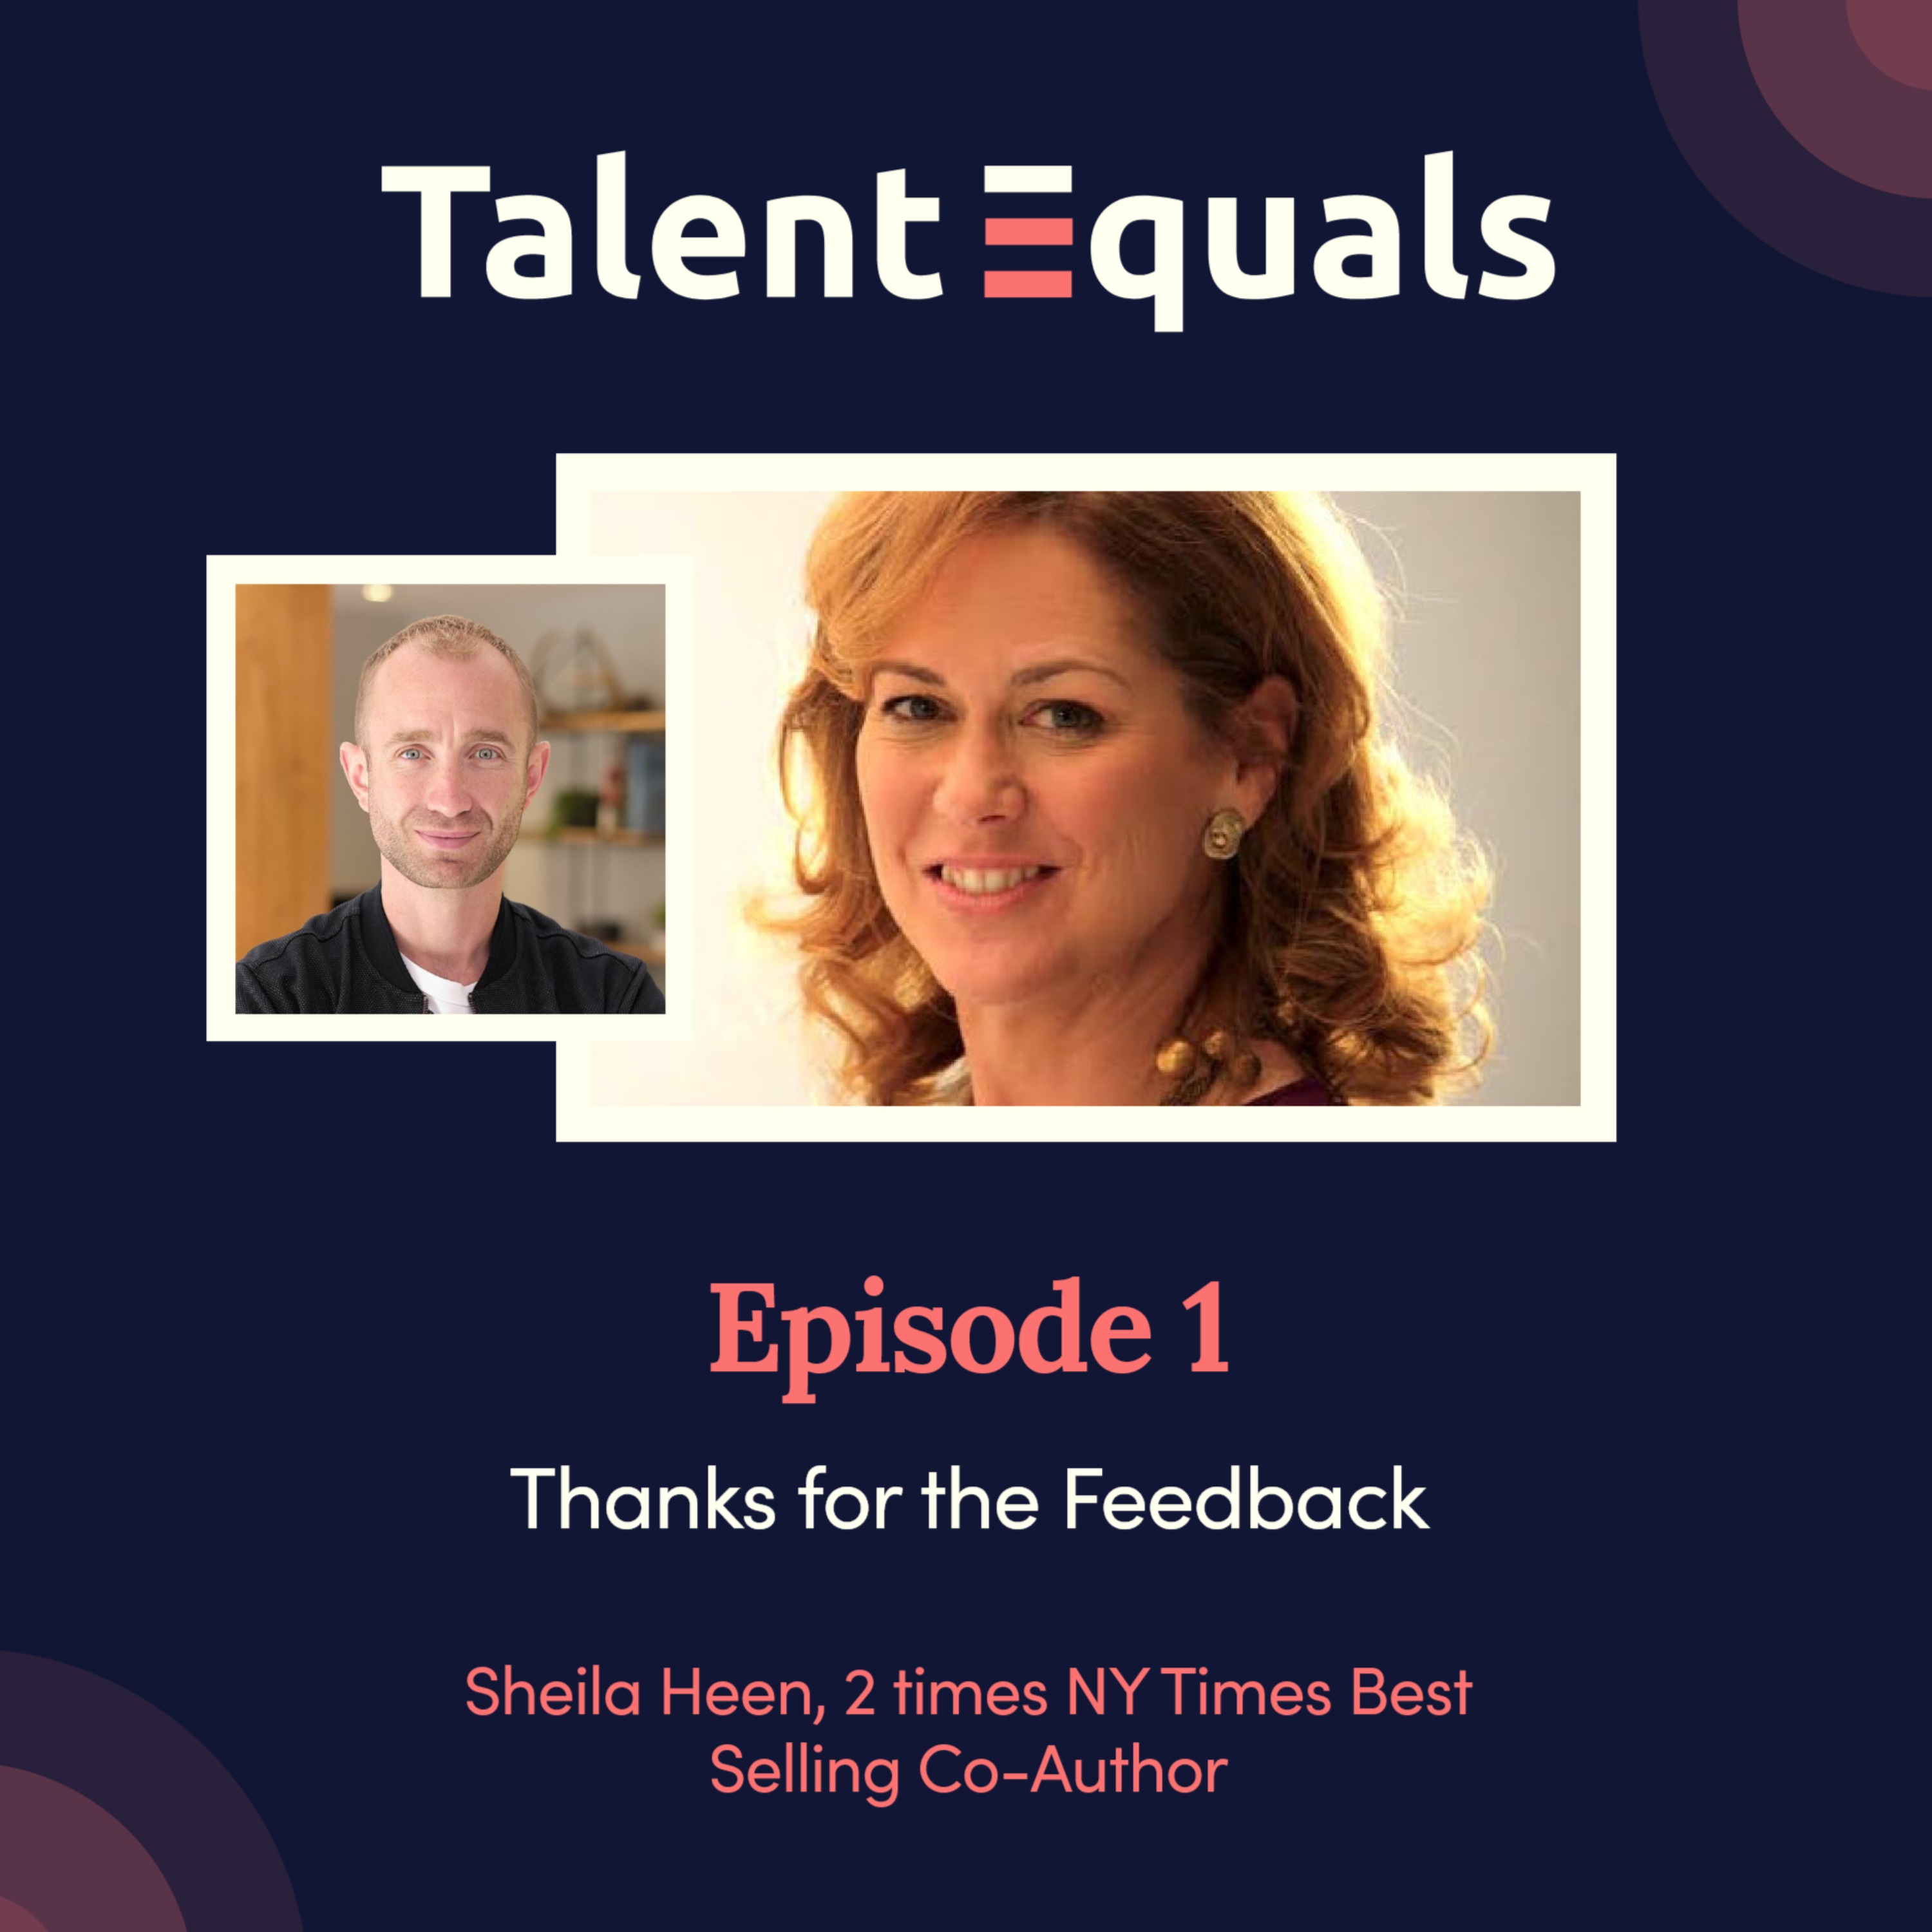 Ep.1. Sheila Heen, 2 times NY Times Best Selling Co-Author - Thanks for the Feedback